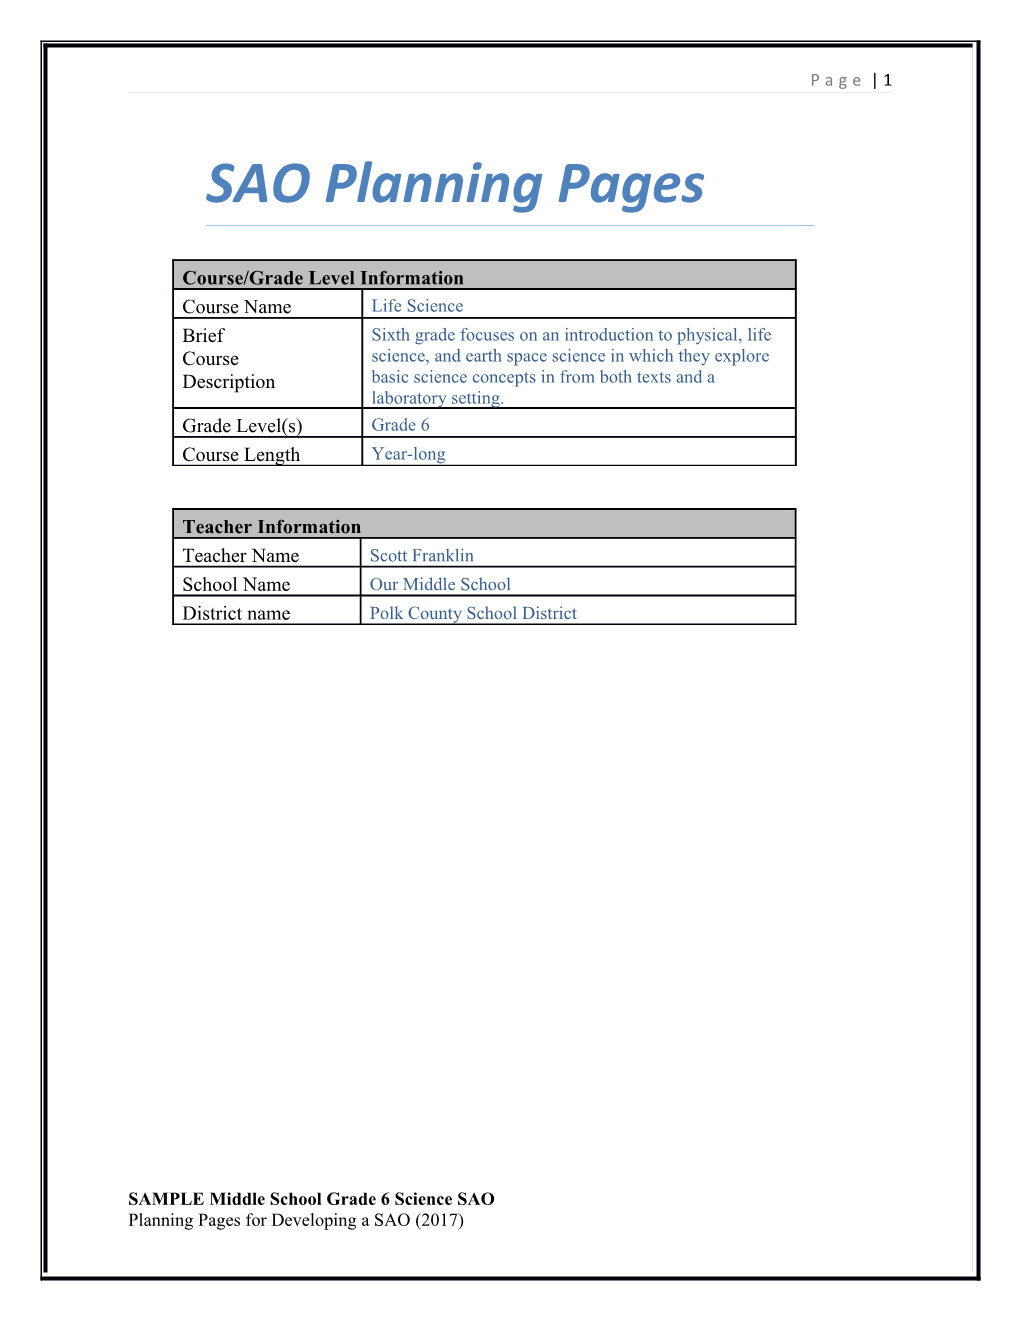 SAO Planning Pages